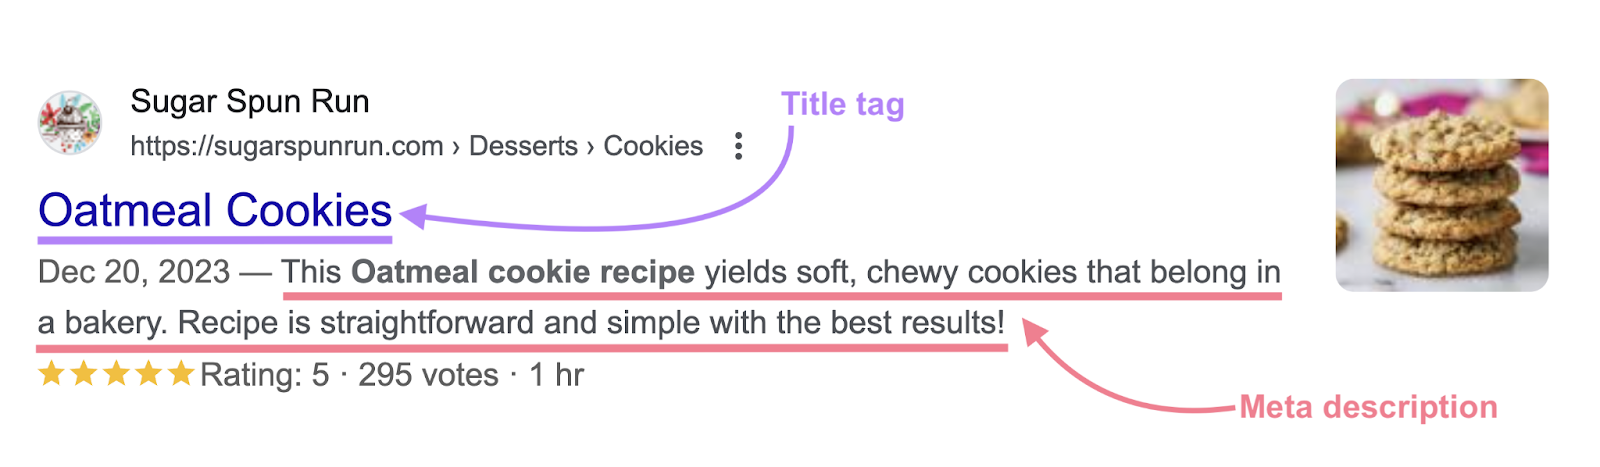 Title tag is Oatmeal Cookies and the meta description is "This oatmeal cookie recipe yields soft, chew cookies that belong in a bakery..."